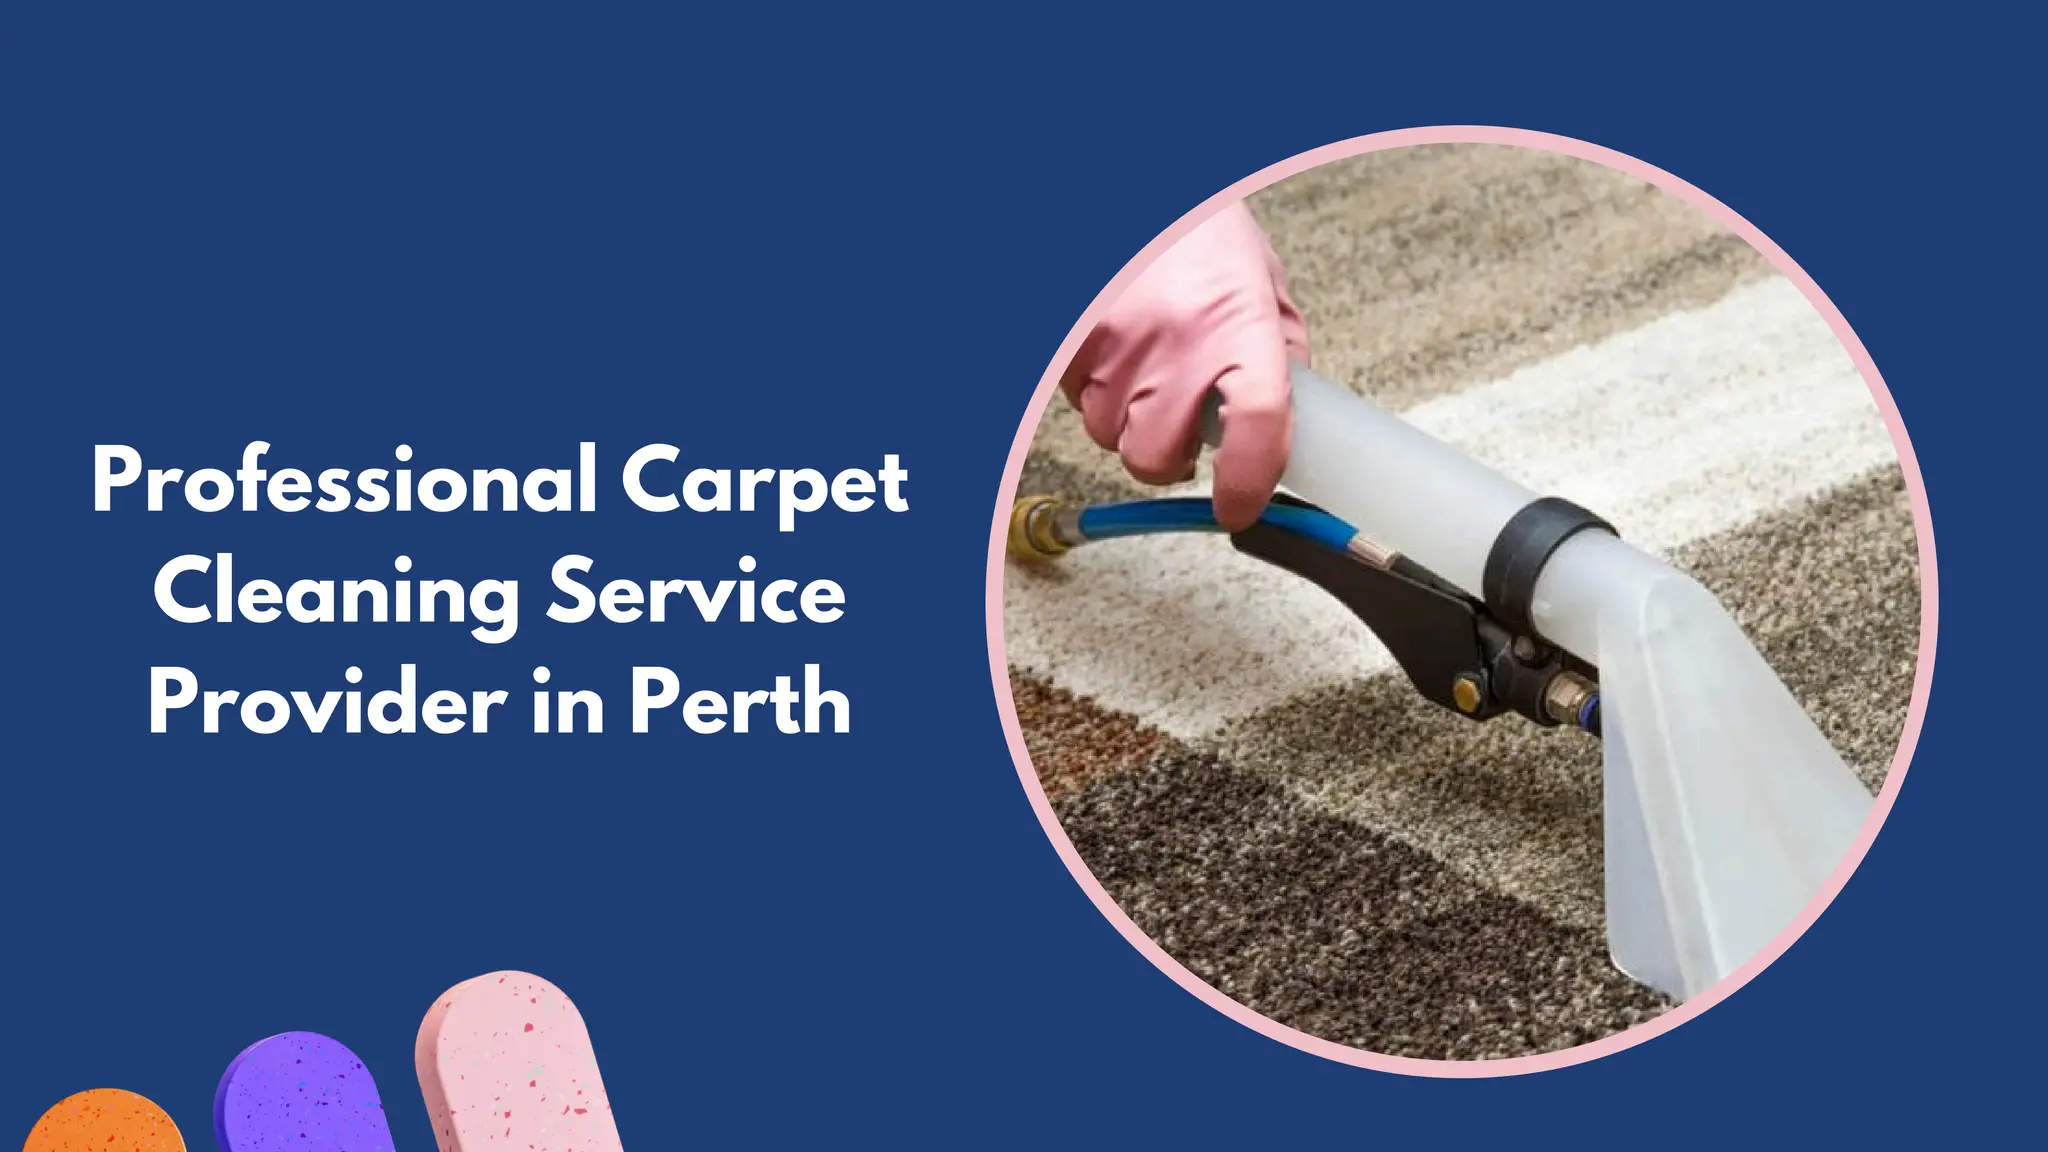 Professional Carpet Cleaning Service Provider in Perth